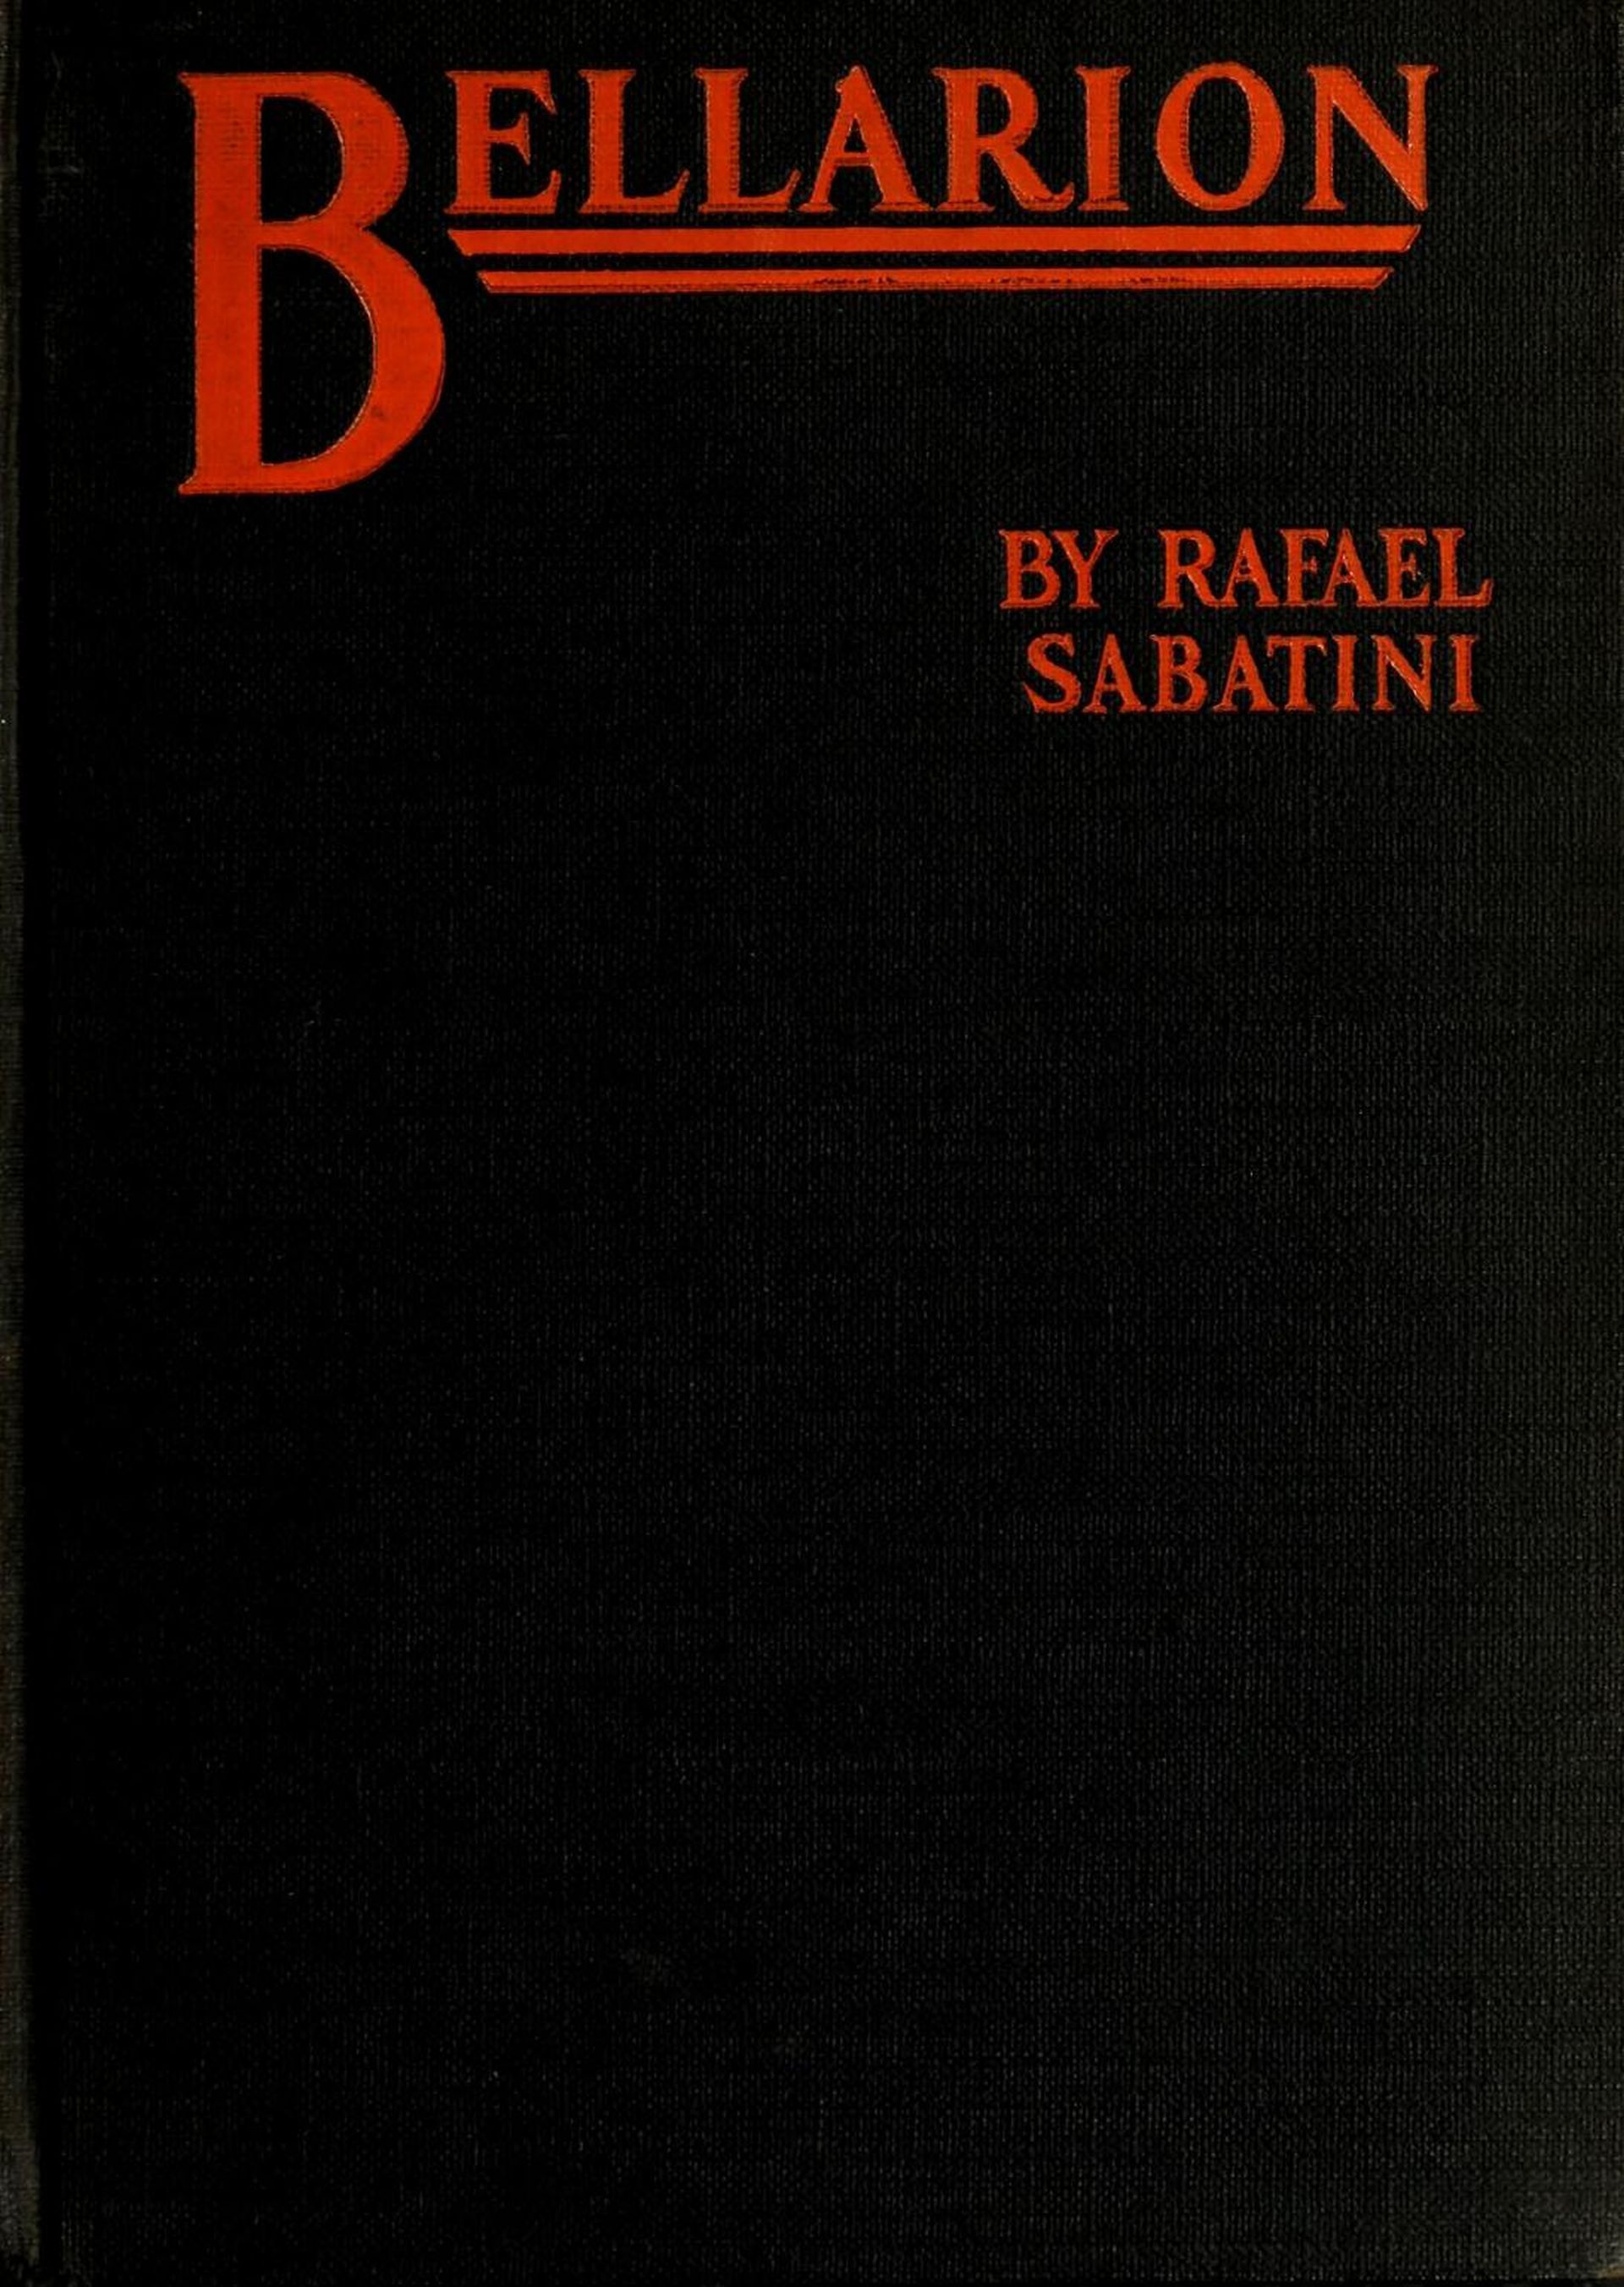 The Project Gutenberg eBook of Bellarion the fortunate by Rafael Sabatini.